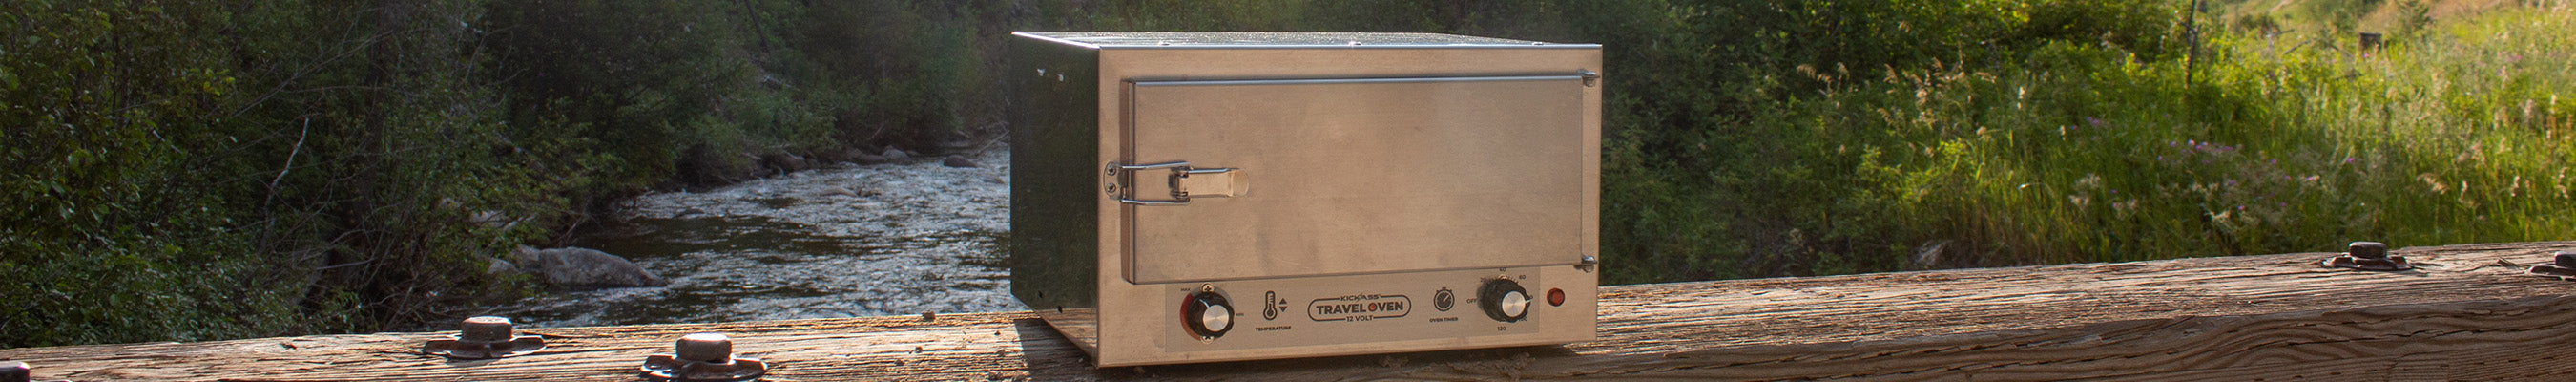 Image of Camping Ovens from KickAss Products.